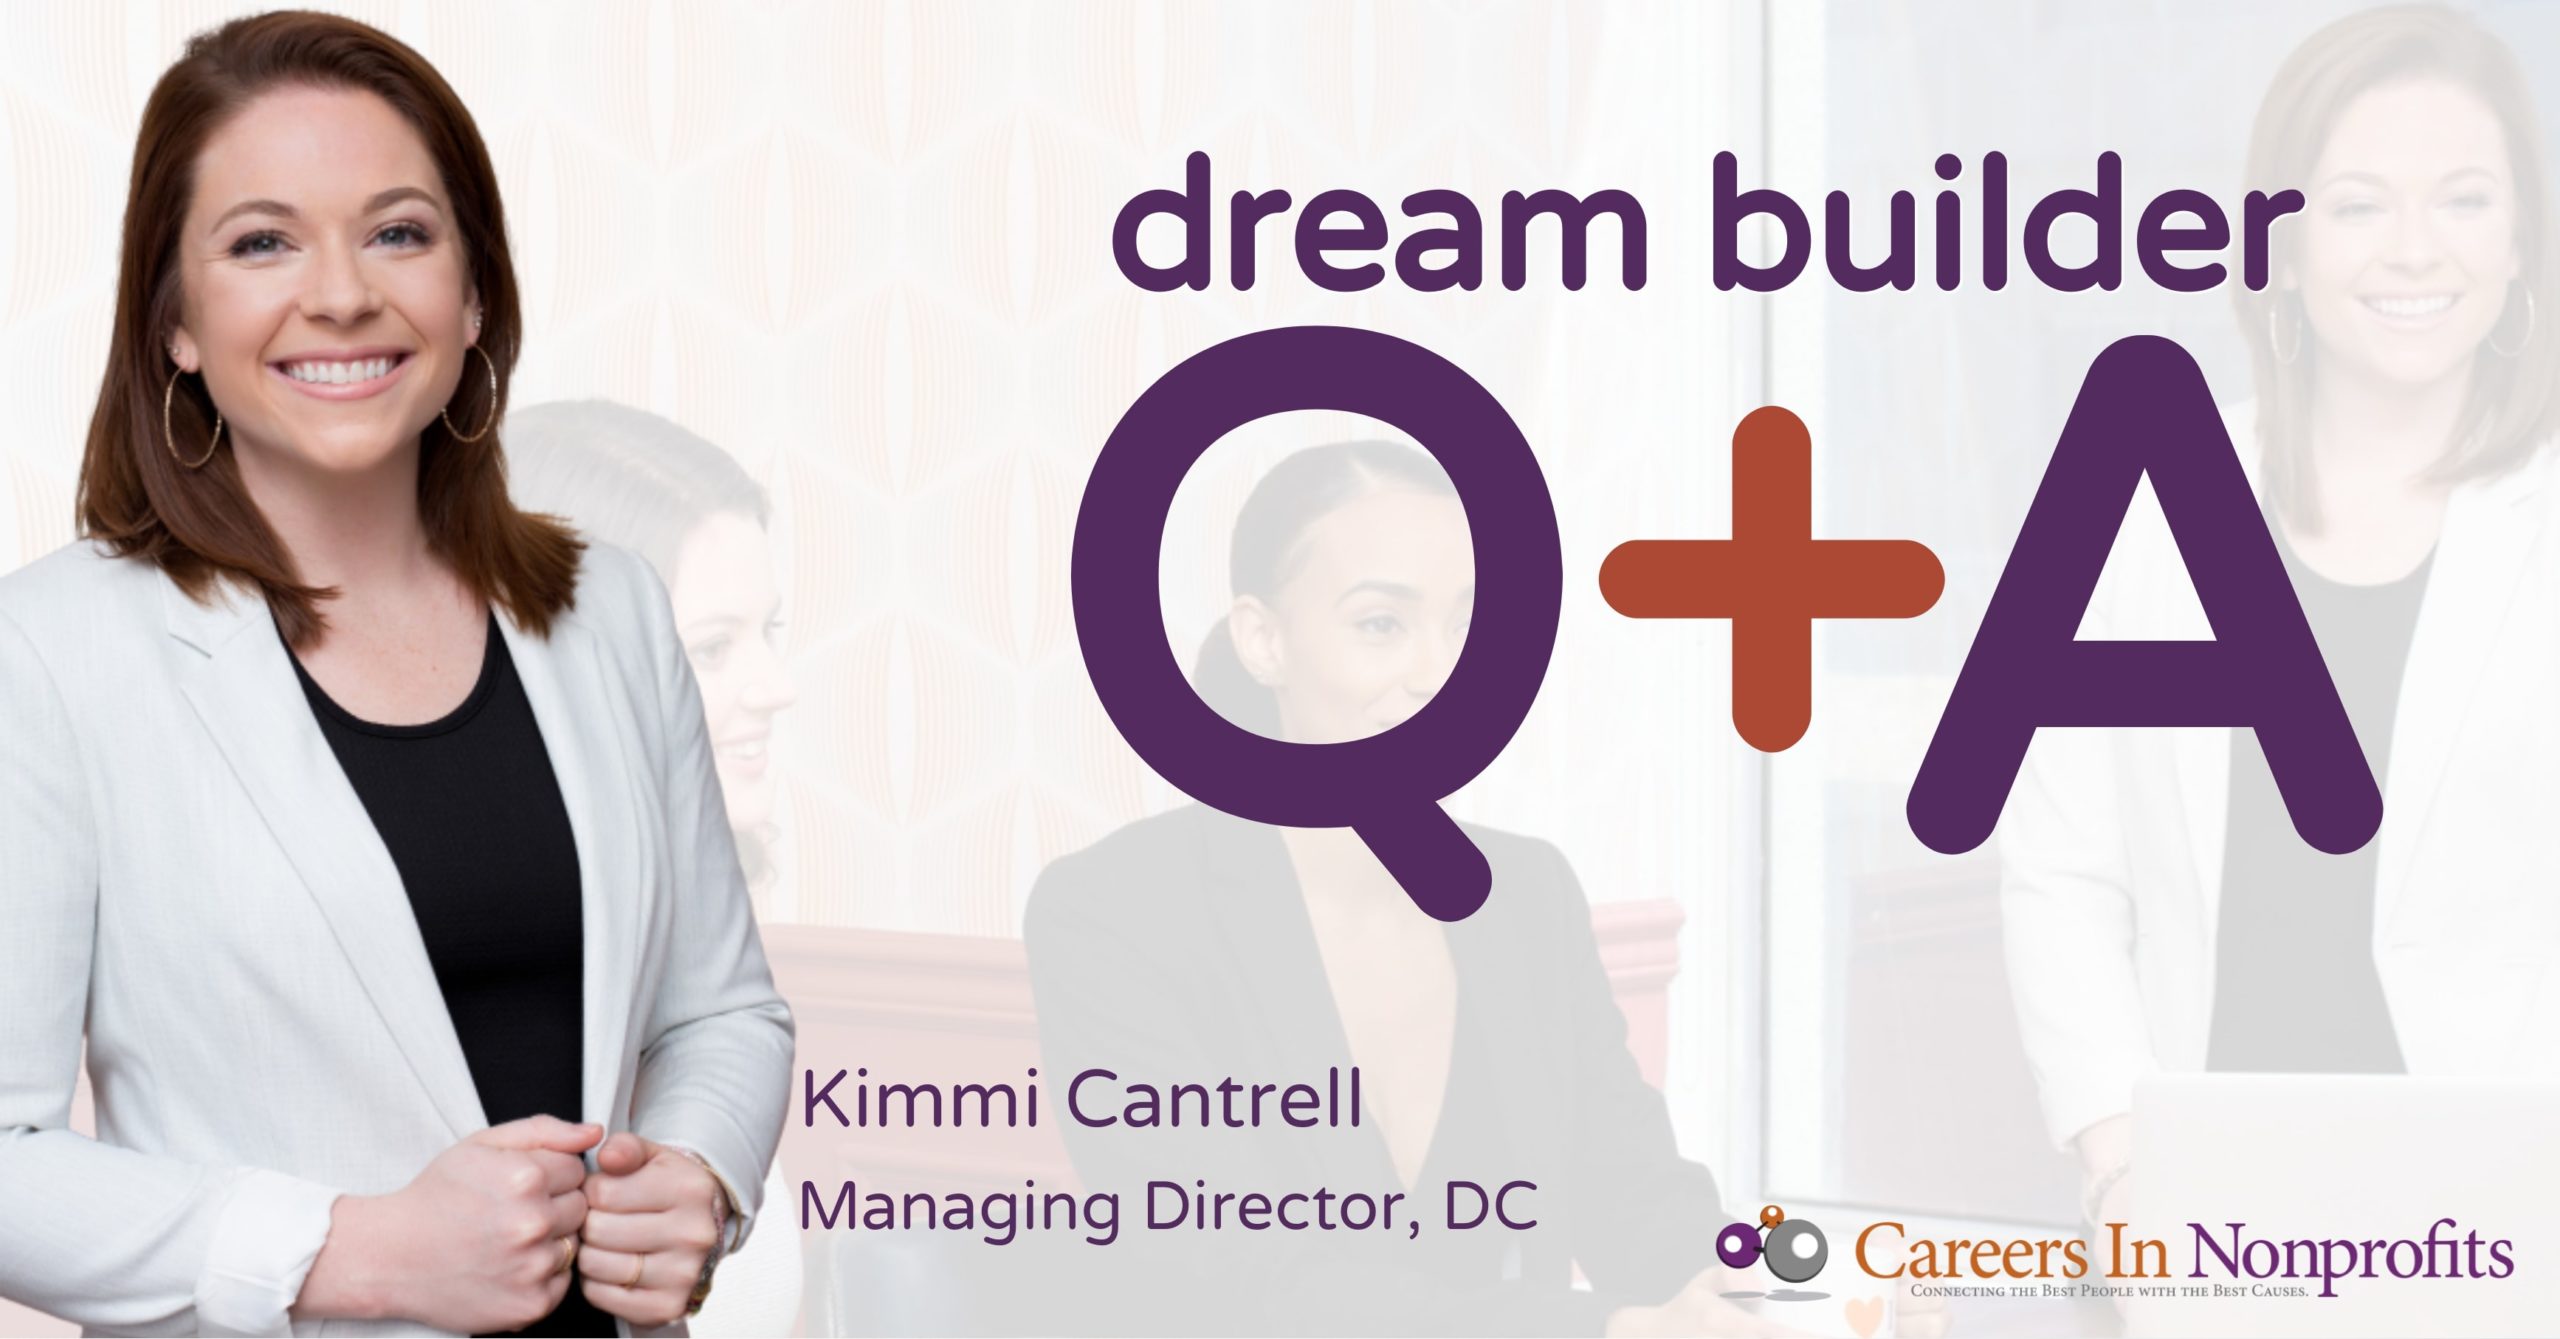 Dream Builder Q&A with Kimmi Cantrell